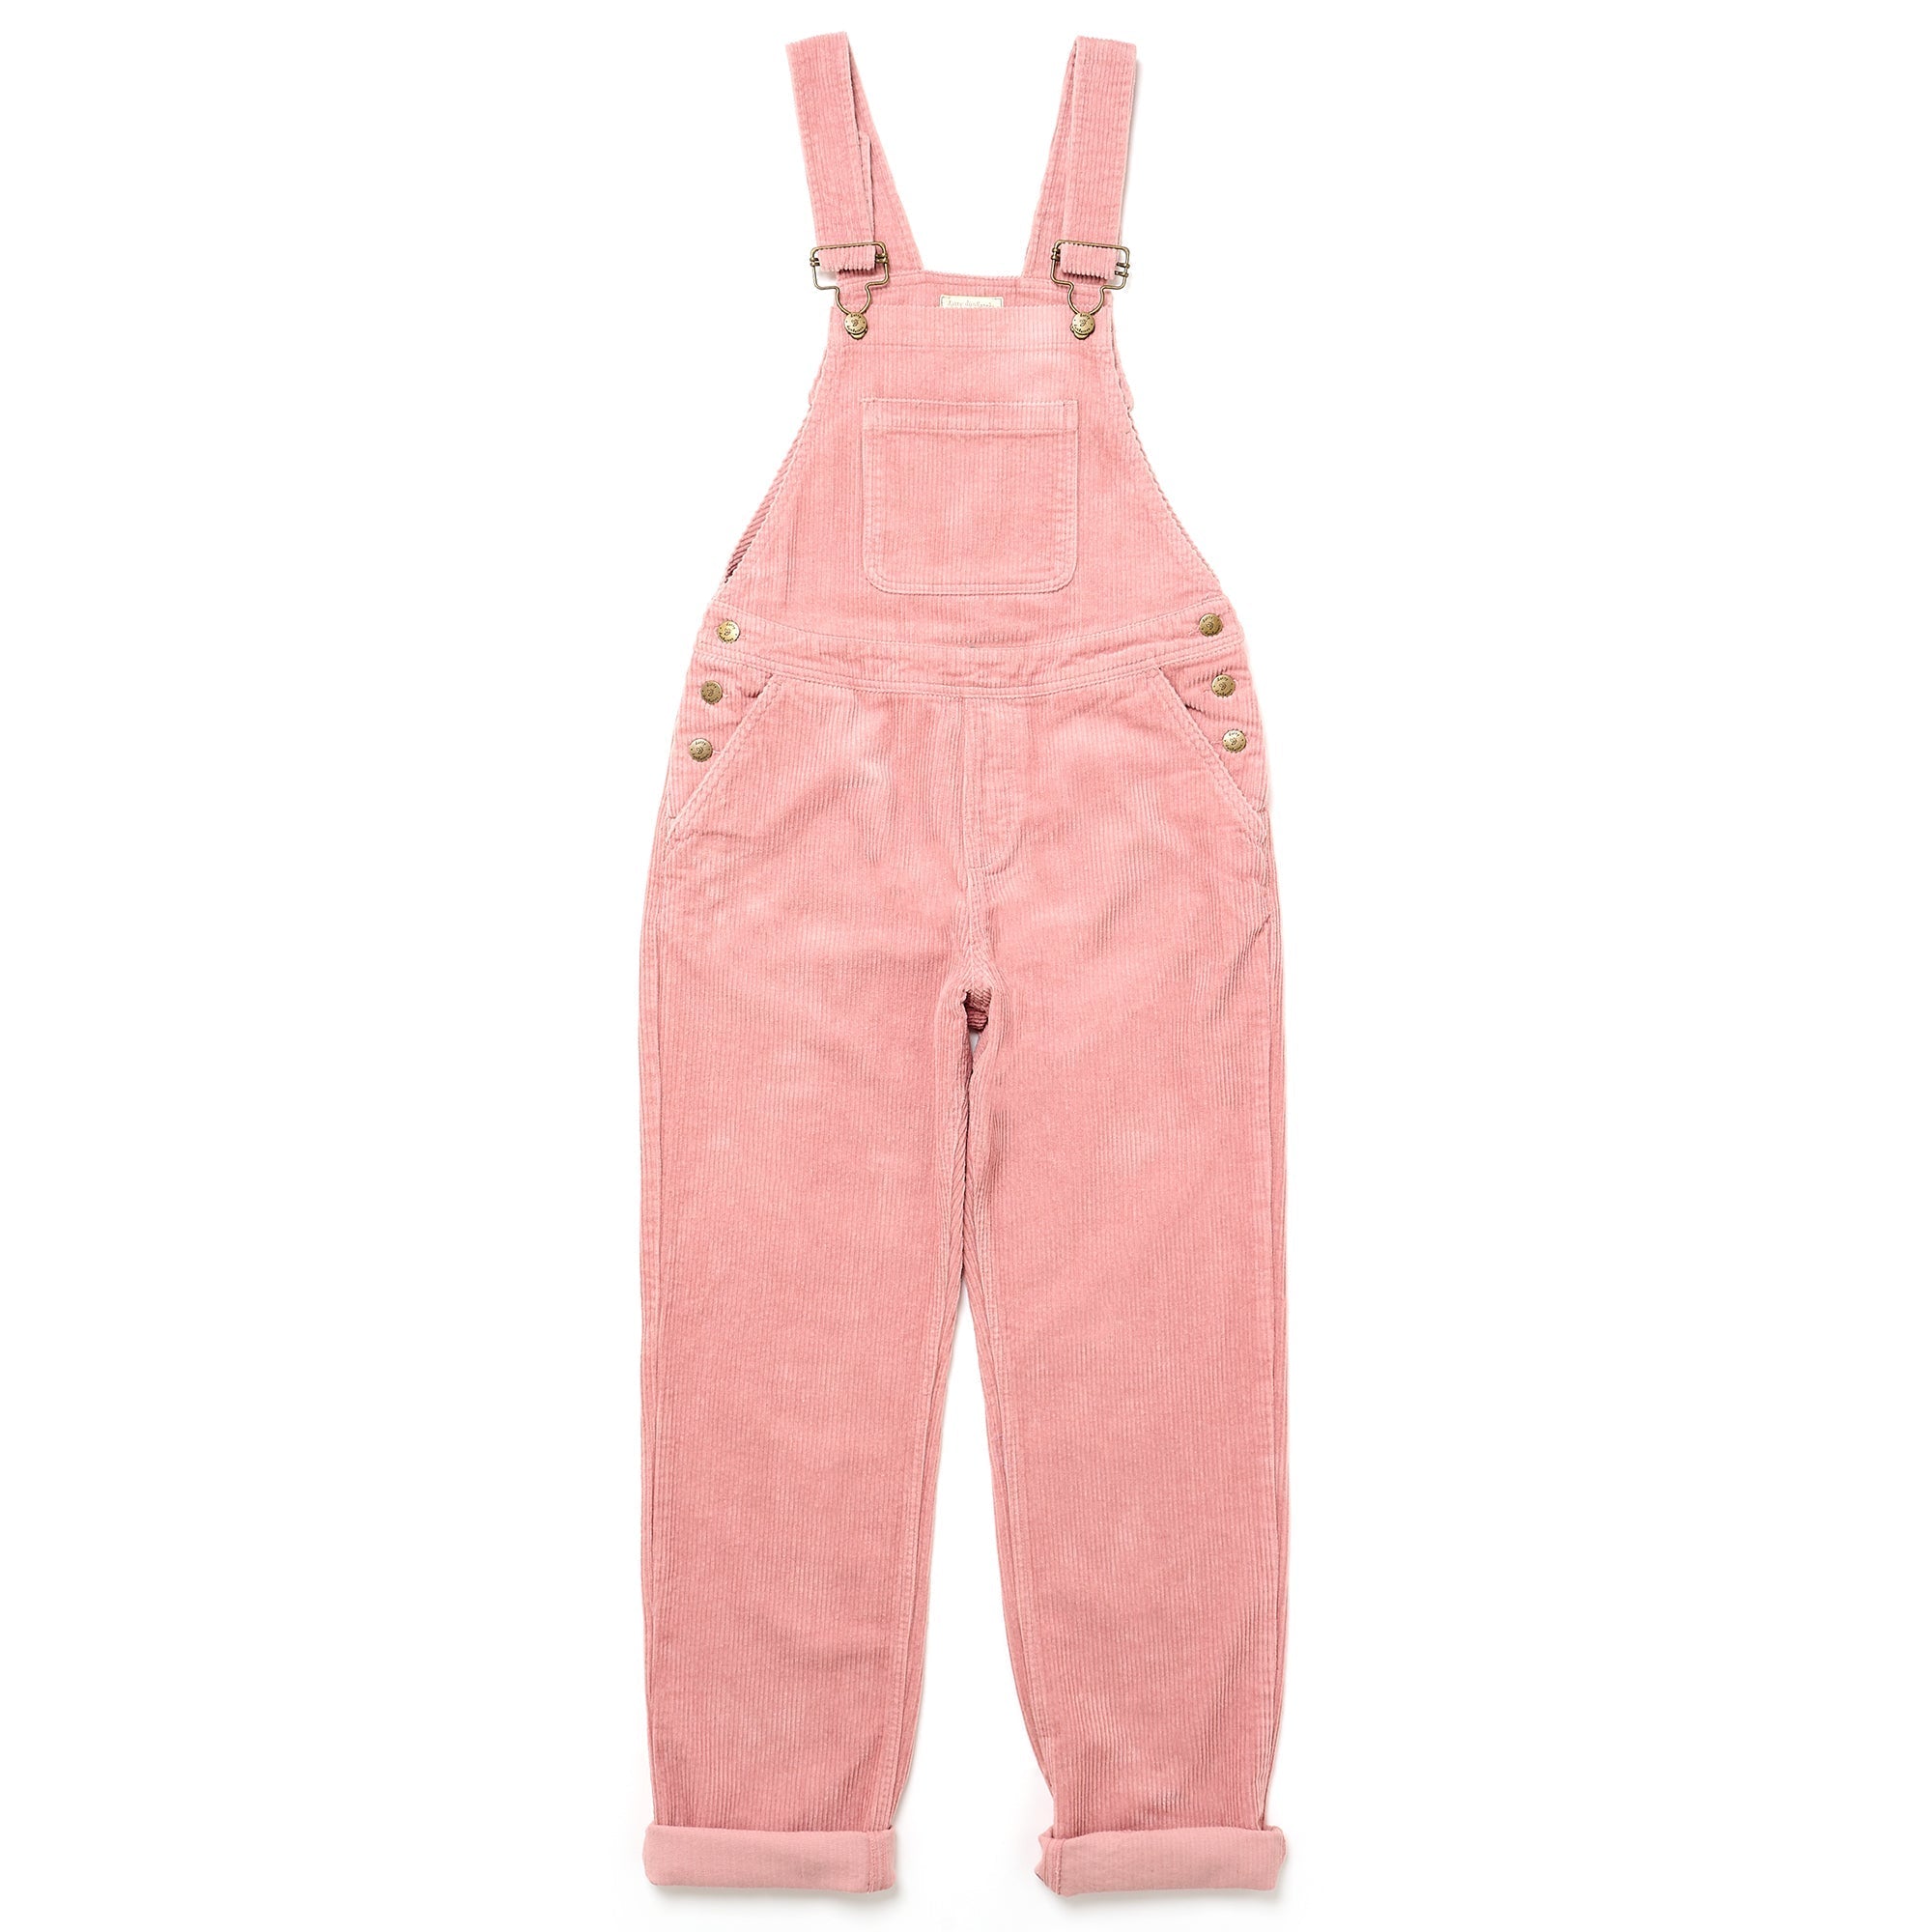 Adult Pink Chunky Cord Dungarees - Dotty Dungarees Ltd